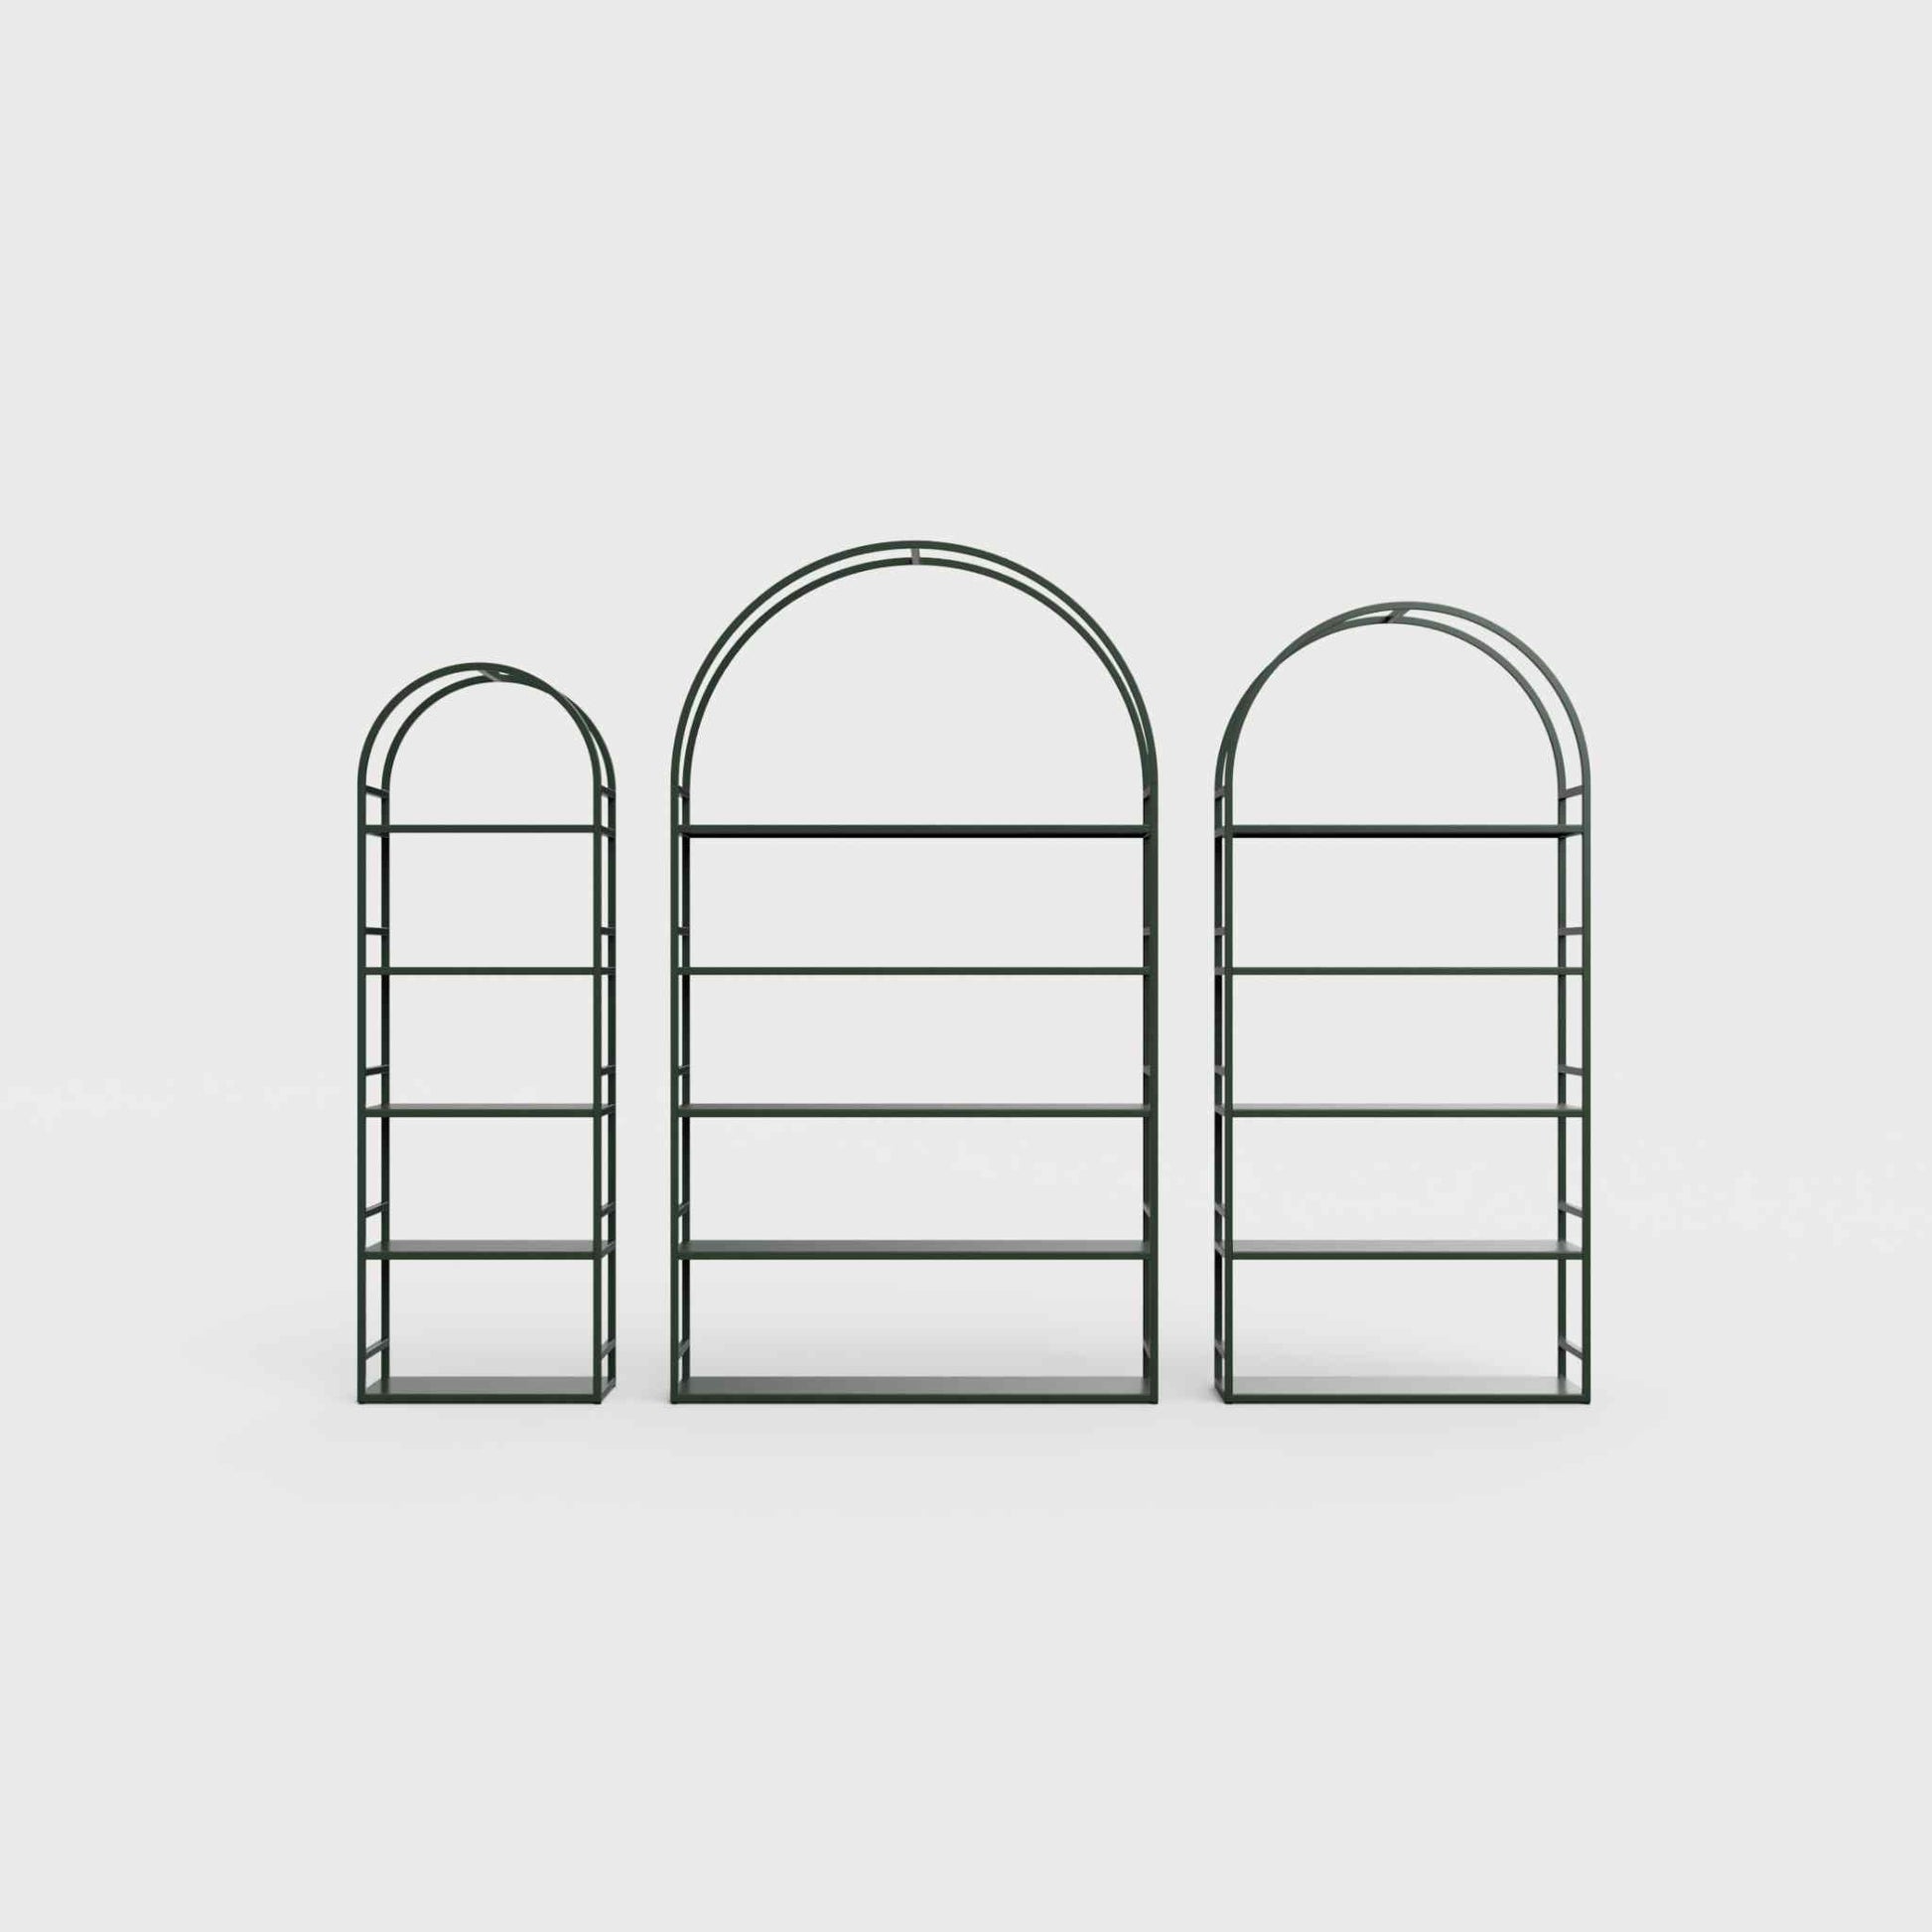 Arched bookcase Arkada, available in Switzerland through ÉTAUDORÉ, made from highest quality powdered coated steel in bottle green color